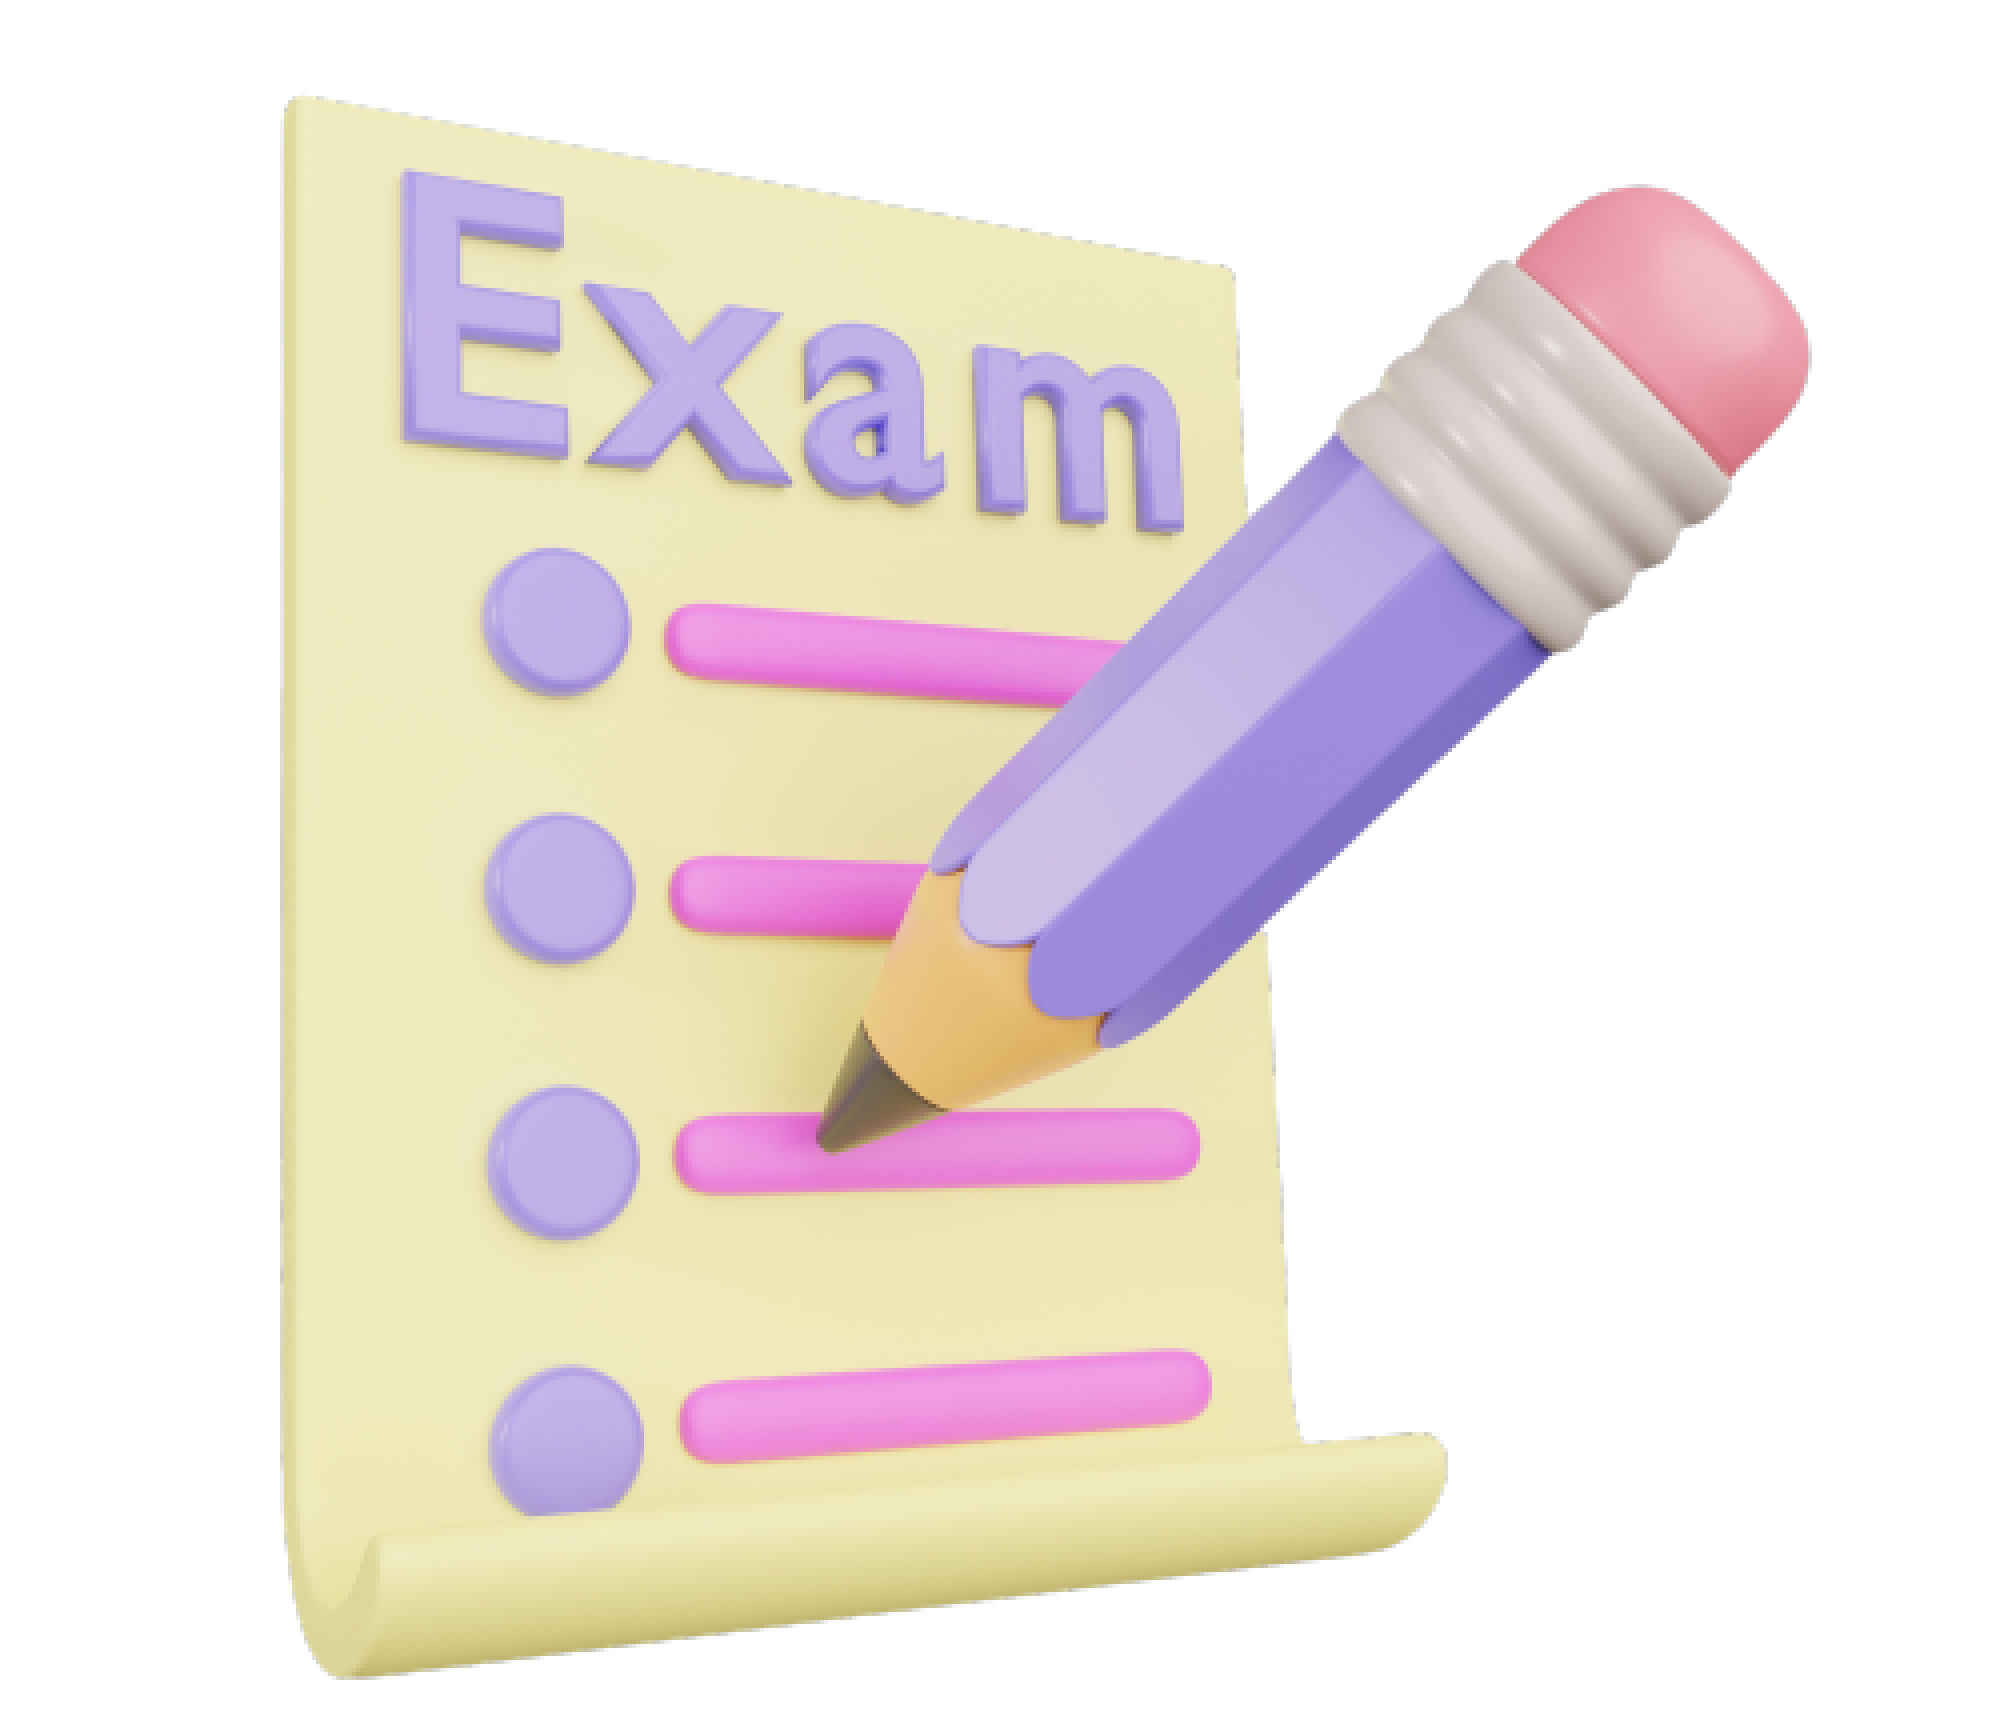 get exam dates and timetable digitally